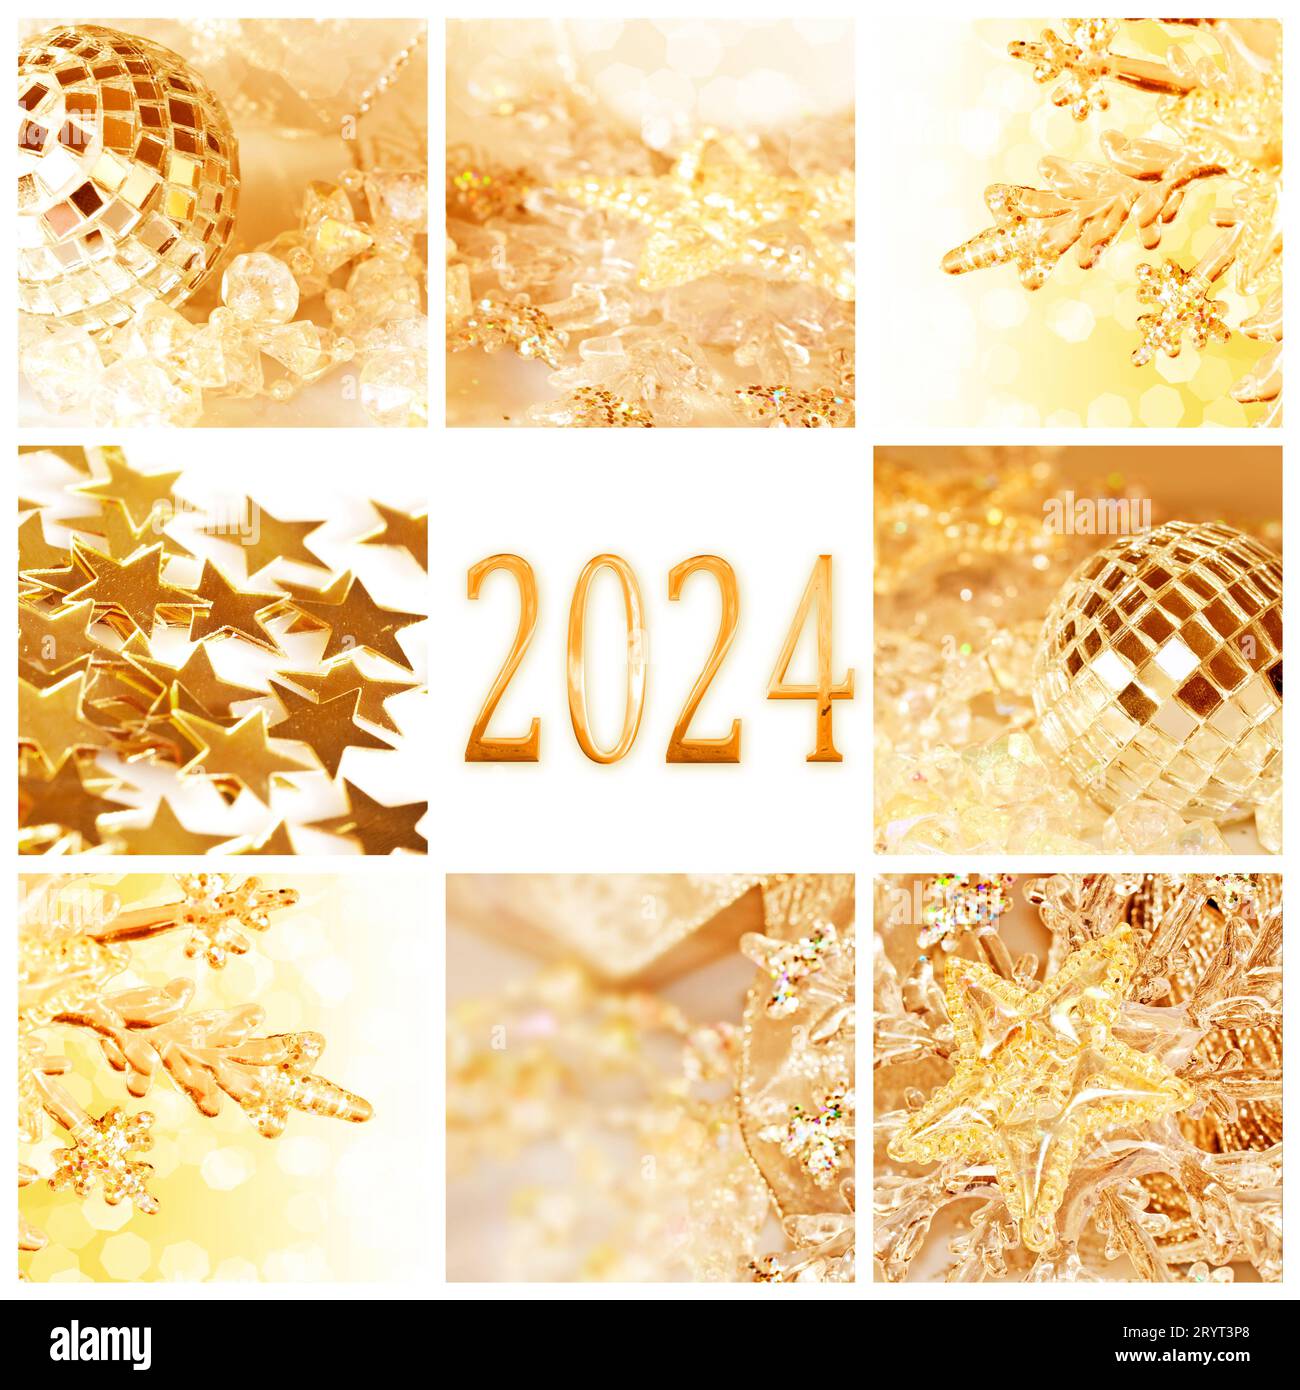 2024, golden christmas ornaments collage square greeting card Stock Photo